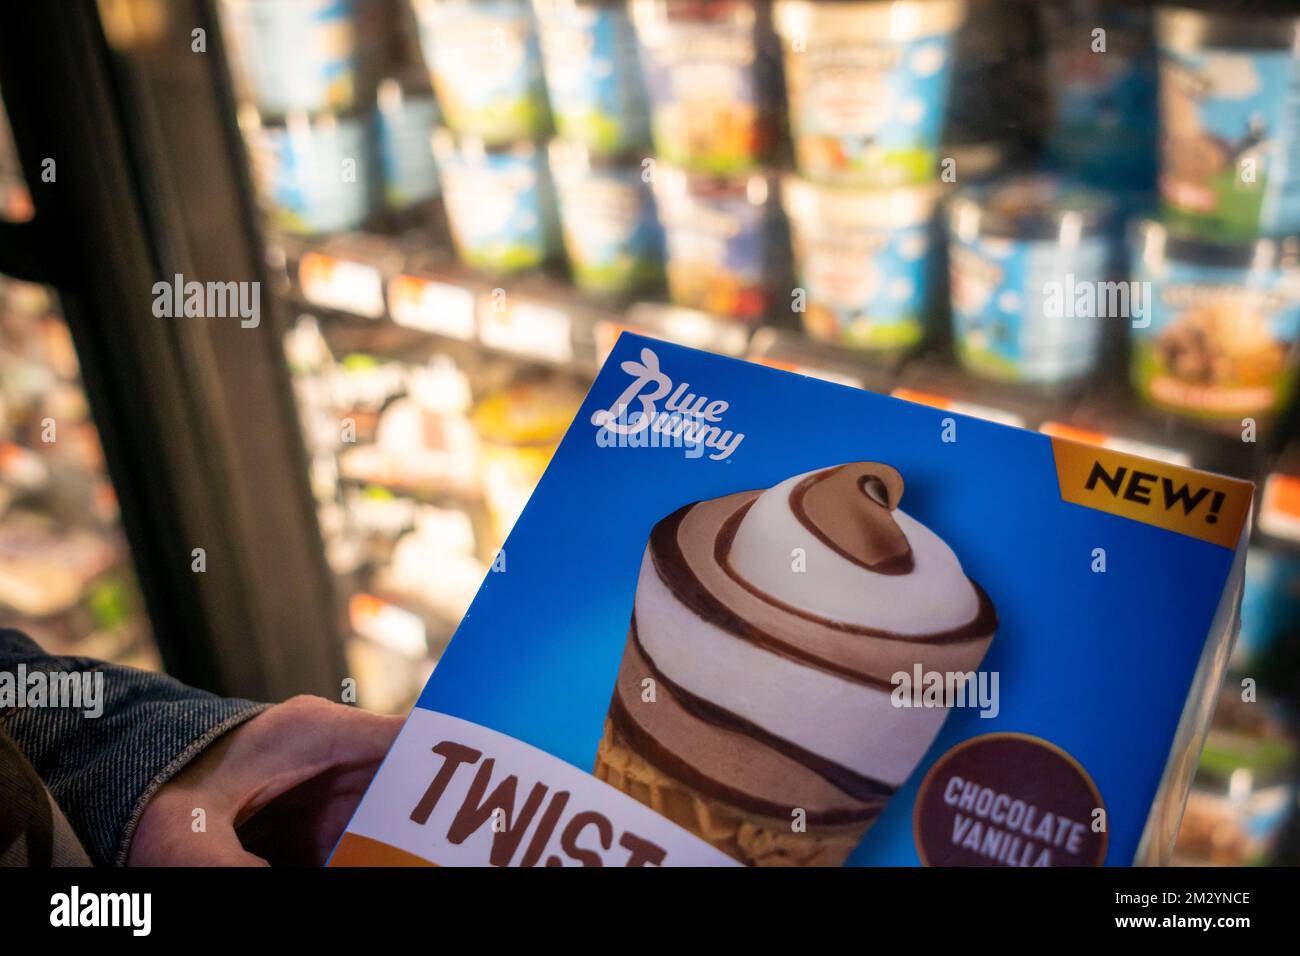 A shopper chooses a package of Blue Bunny ice cream “Twist Cones” in a supermarket in New York on Thursday, December 8, 2022. The Italian confectionary company Ferrero announced that it is acquiring Wells Enterprises maker of Blue Bunny, Halo Top and number of other brands.   (© Richard B. Levine) Stock Photo